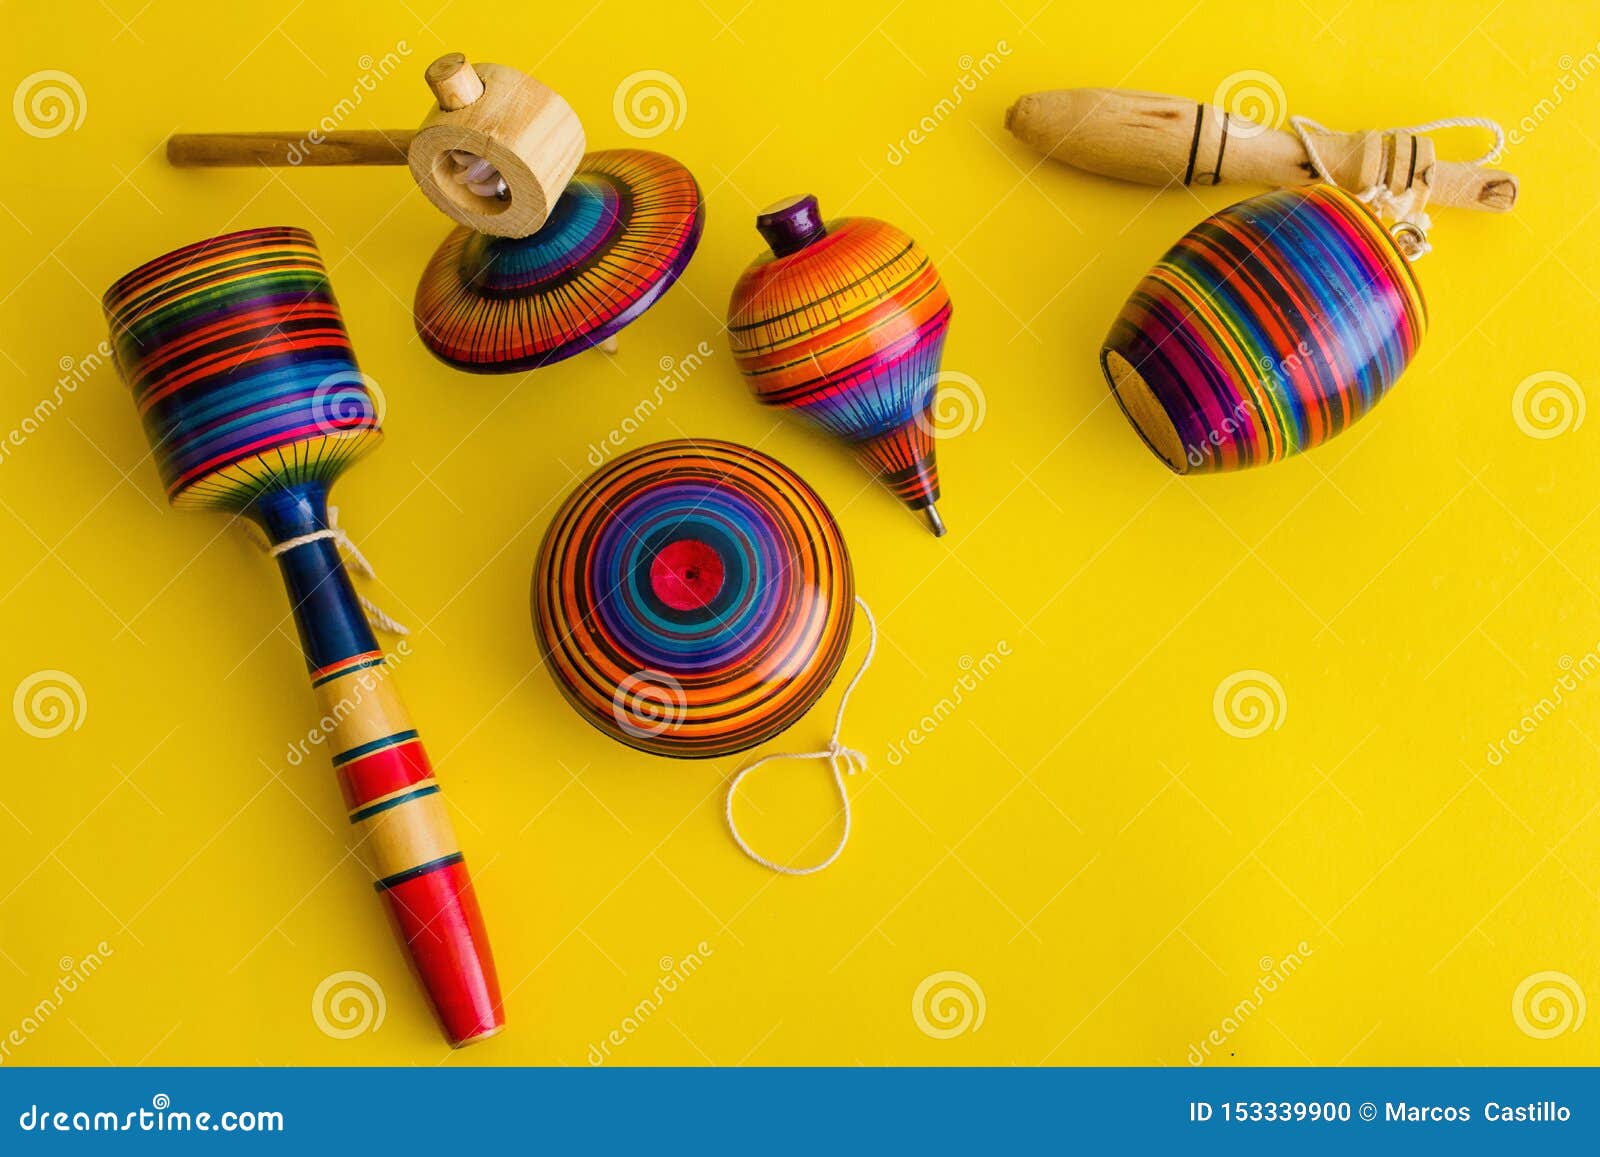 mexican toys from wooden, balero, yoyo and trompo in mexico on a yellow background